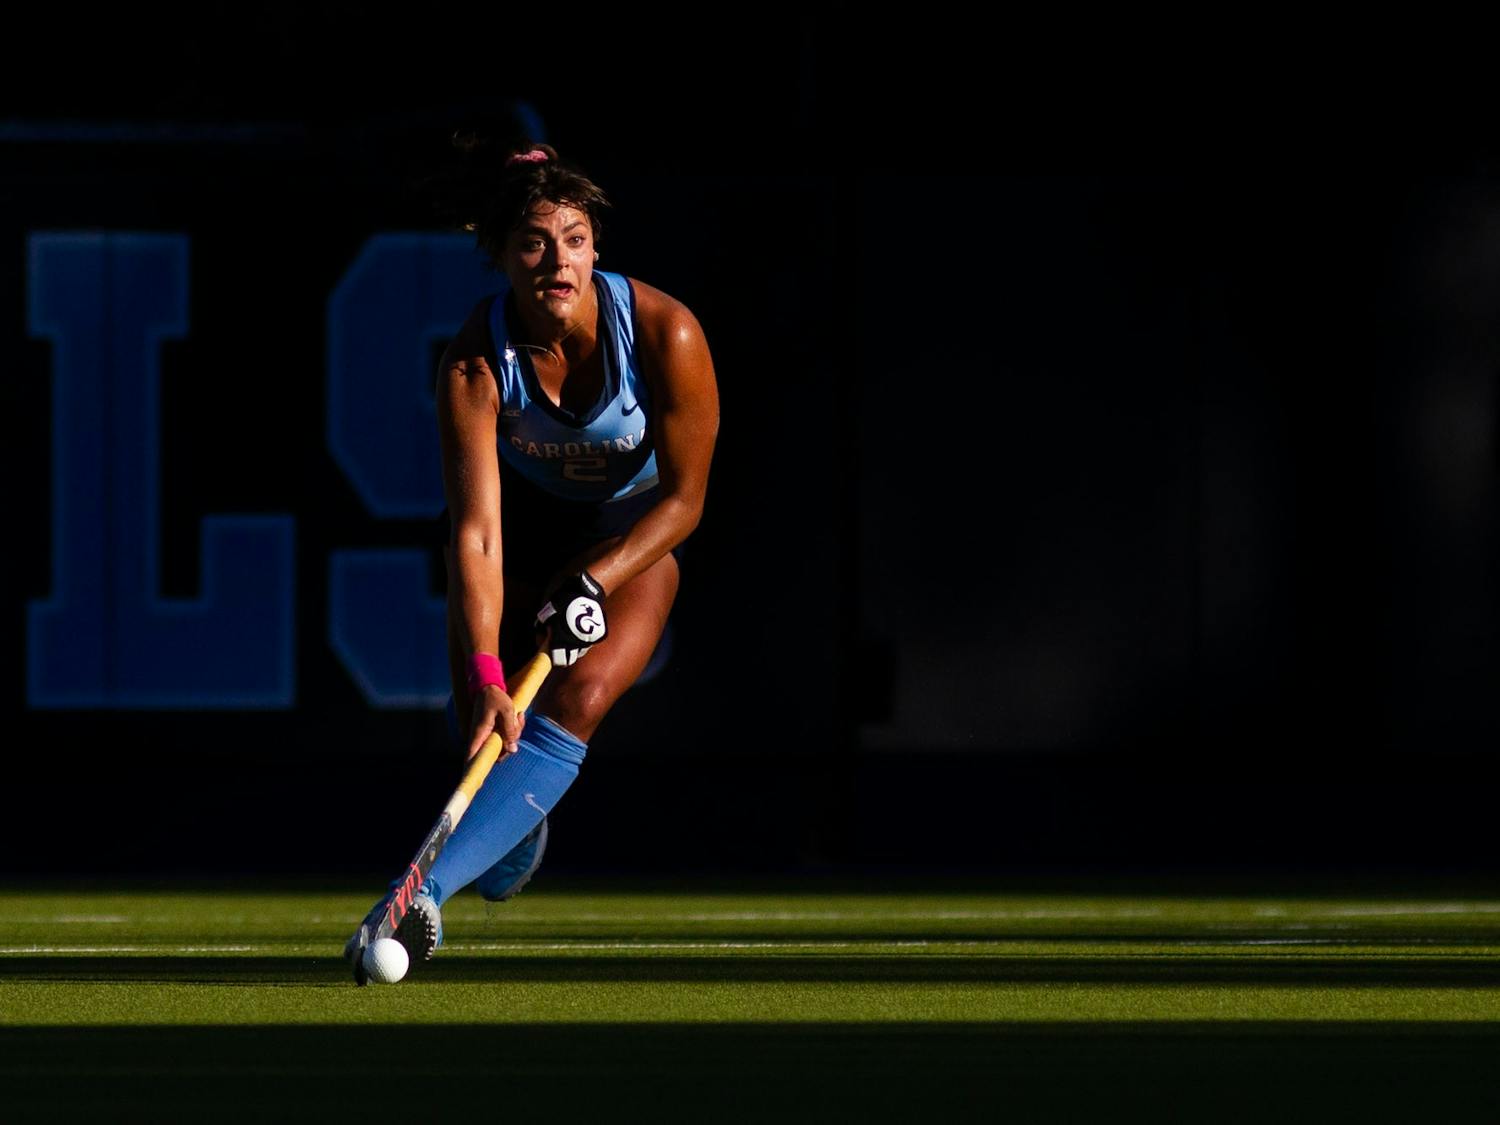 UNC senior forward Meredith Sholder (2) prepares to carry the ball down the field during the Tar Heels' home matchup against Boston College at Karen Shelton Stadium on Sept. 24, 2021. The Tar Heels won 6-1. 